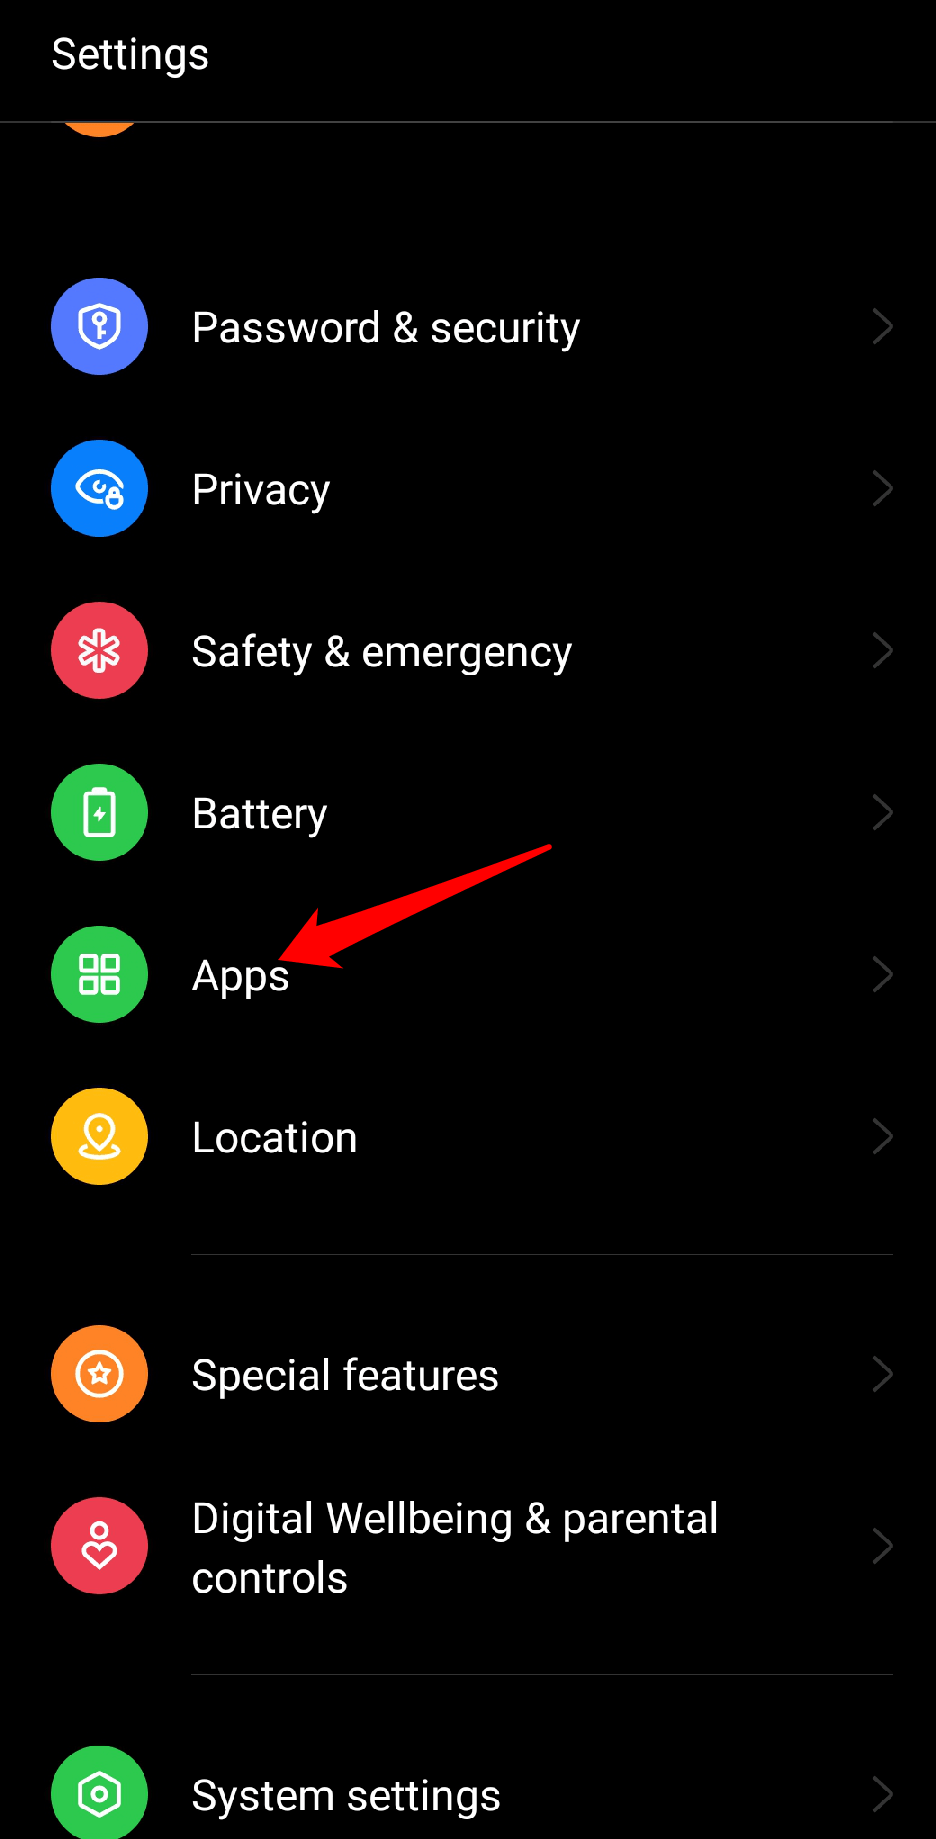 Then select apps.